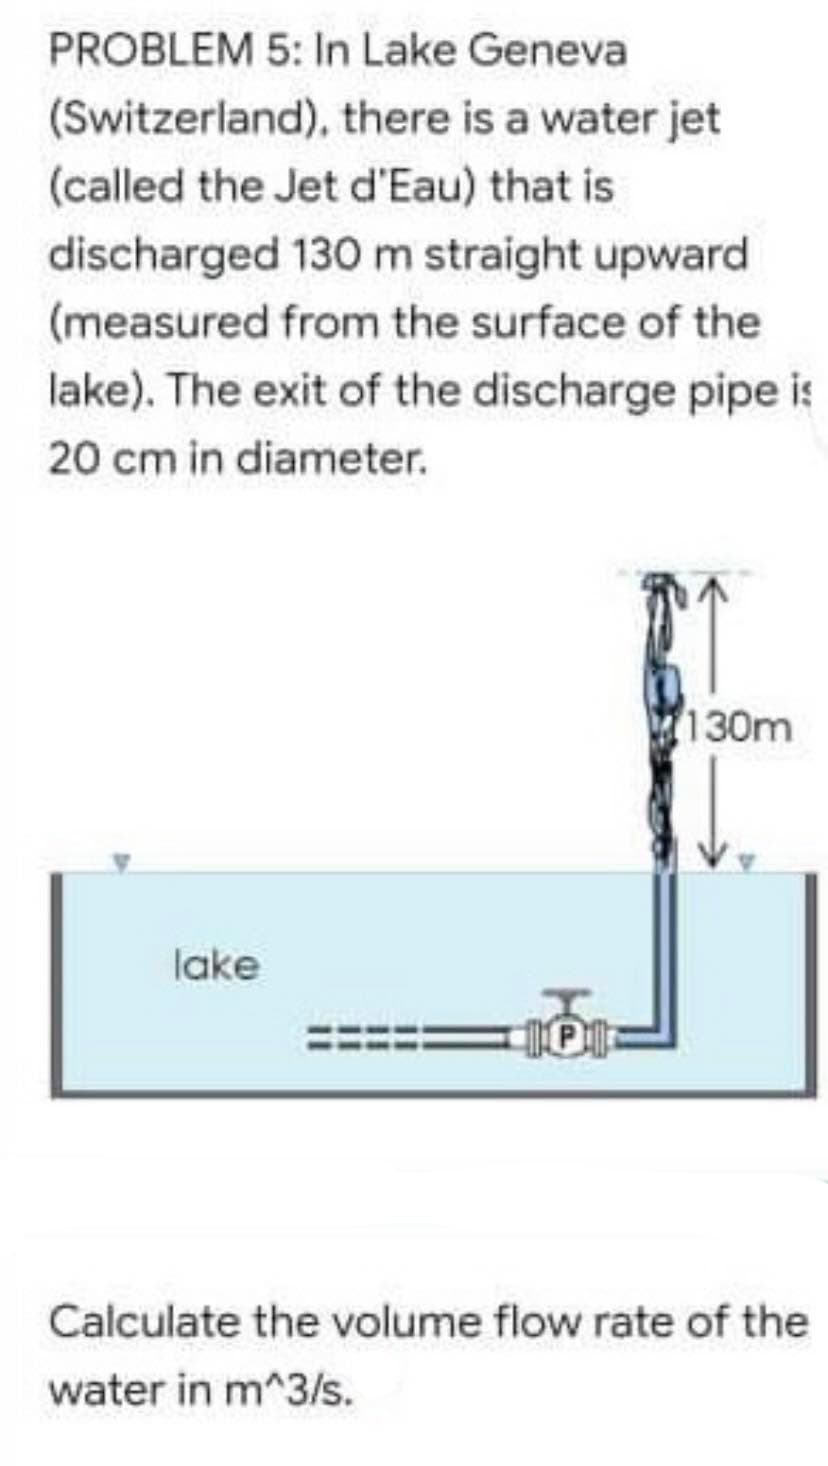 PROBLEM 5: In Lake Geneva
(Switzerland), there is a water jet
(called the Jet d'Eau) that is
discharged 130 m straight upward
(measured from the surface of the
lake). The exit of the discharge pipe is
20 cm in diameter.
130m
lake
Calculate the volume flow rate of the
water in m^3/s.
